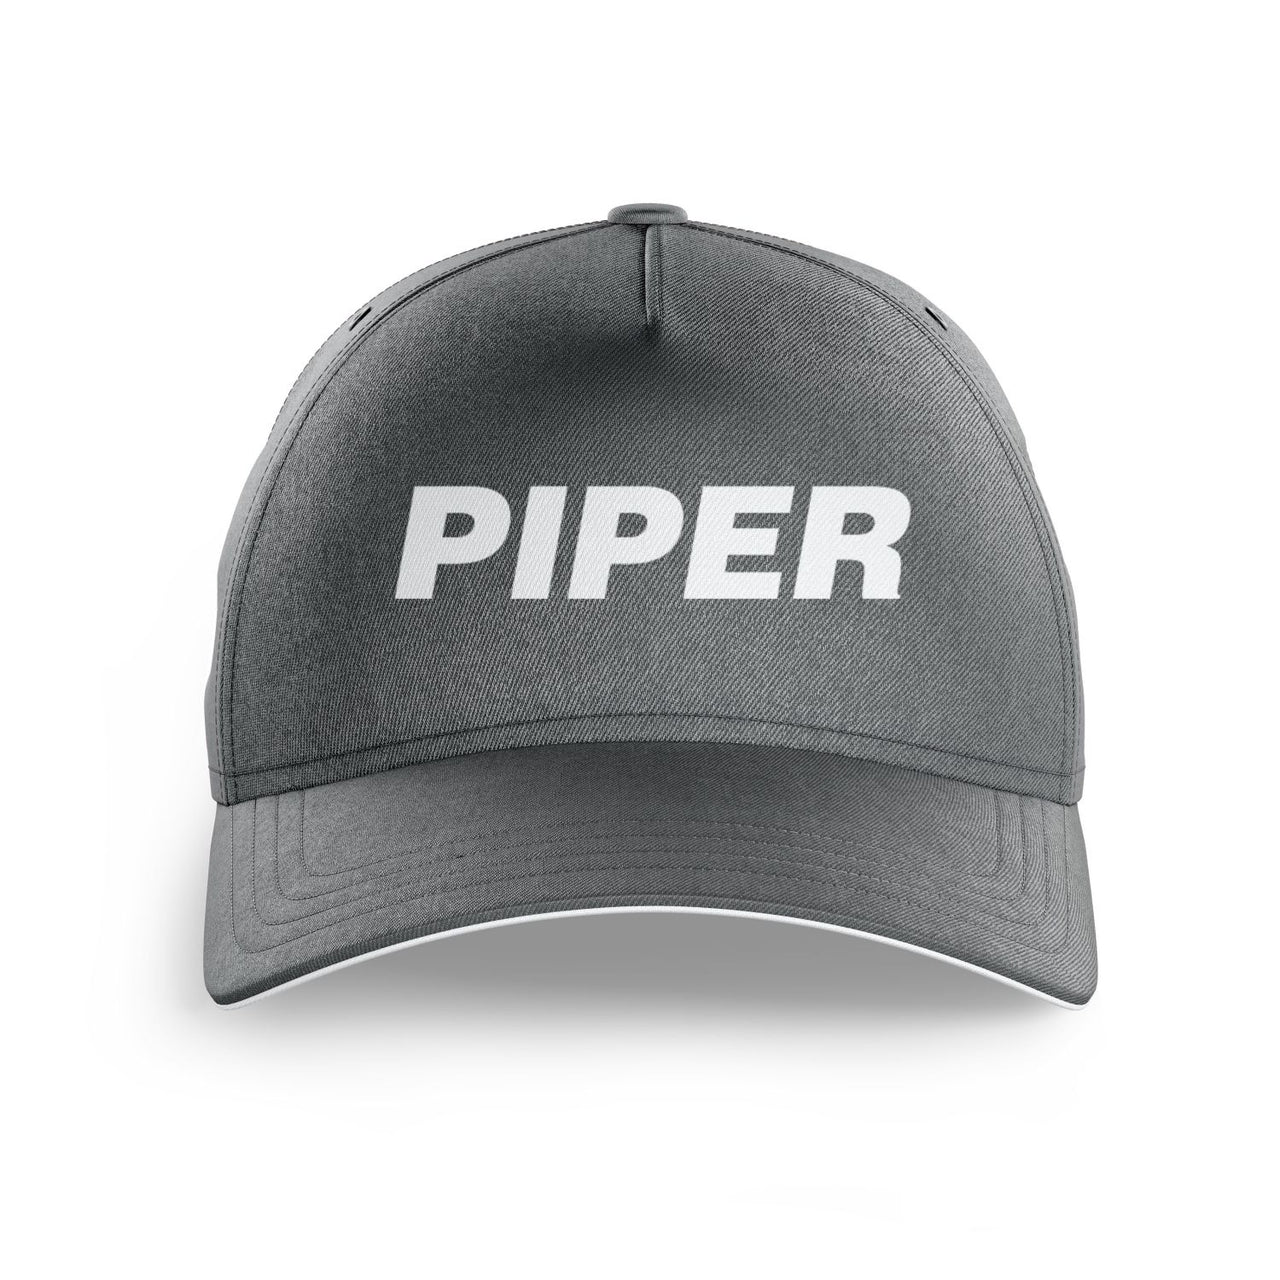 Piper & Text Printed Hats